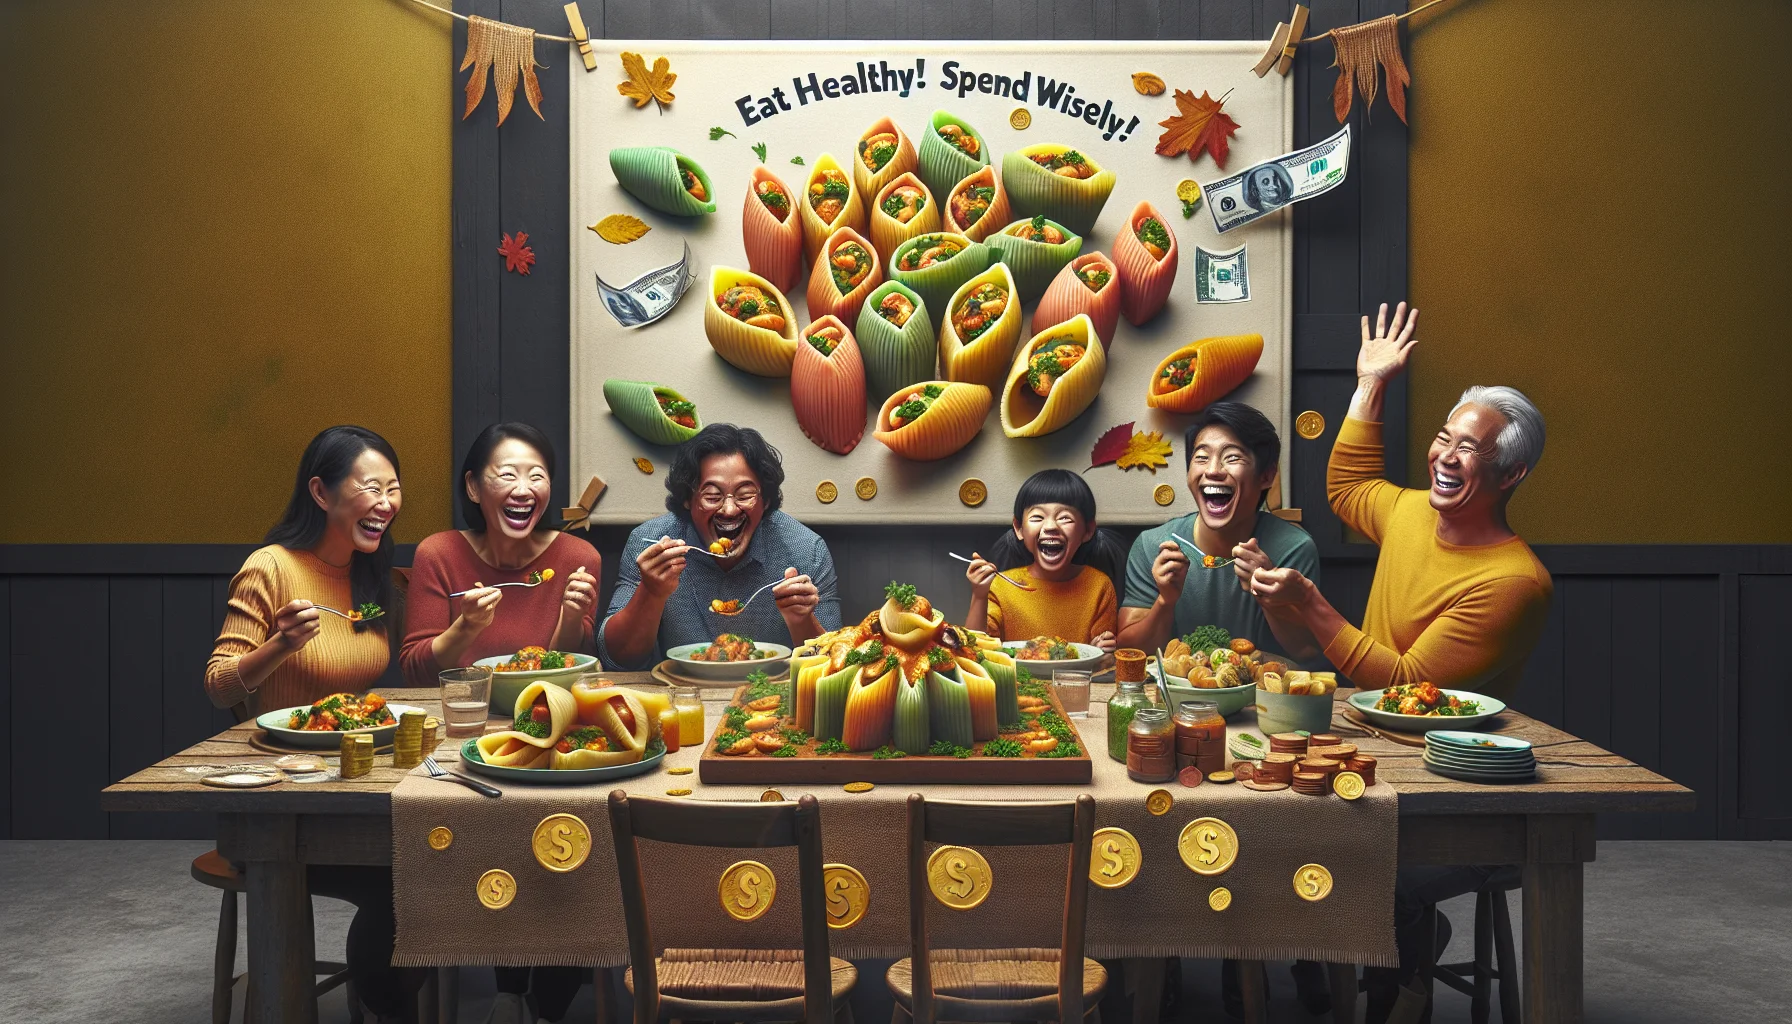 A humorous, realistic setting featuring Autumn-Themed Stuffed Shells being presented as a cost-effective healthy meal. The scene displays colorfully stuffed pasta shells garnished with autumnal herbs placed on a rustic dining table. Next to the dish are coins and dollar bills indicating the affordability of the meal. A vertical banner playfully declares: 'Eat Healthy! Spend Wisely!'. A group of diverse people, an enthusiastic Asian man, a cheerful Hispanic woman, and a jovial Black child are visibly delighted at the sight of the food, ready to dig in. The atmosphere is filled with laughter, warmth, and the rich hues of autumn.